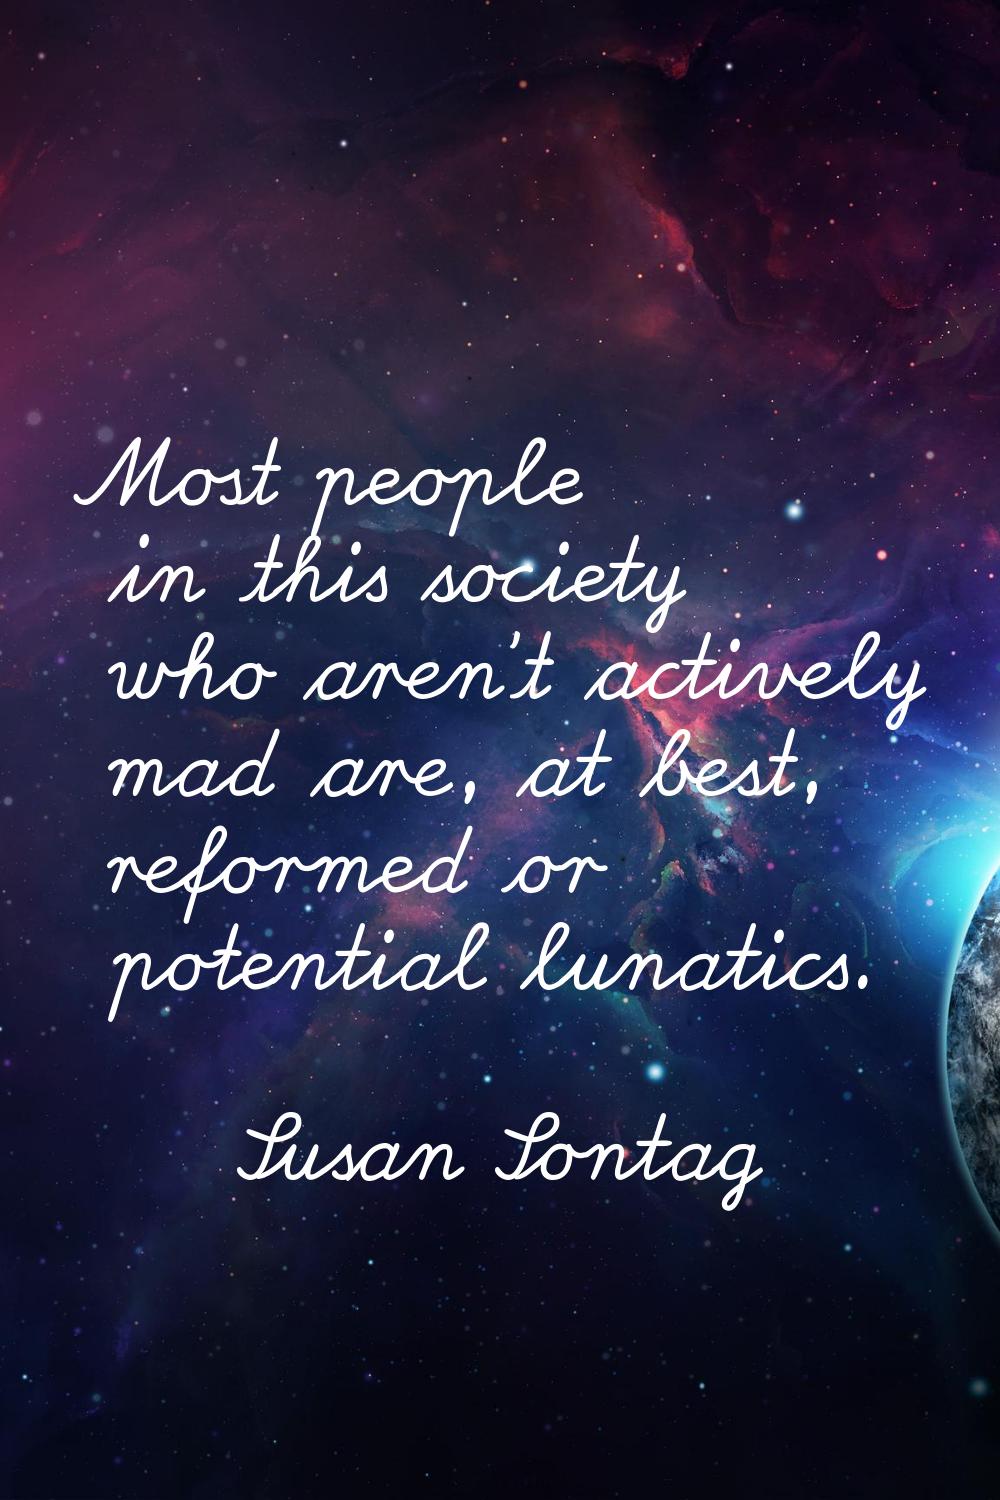 Most people in this society who aren't actively mad are, at best, reformed or potential lunatics.